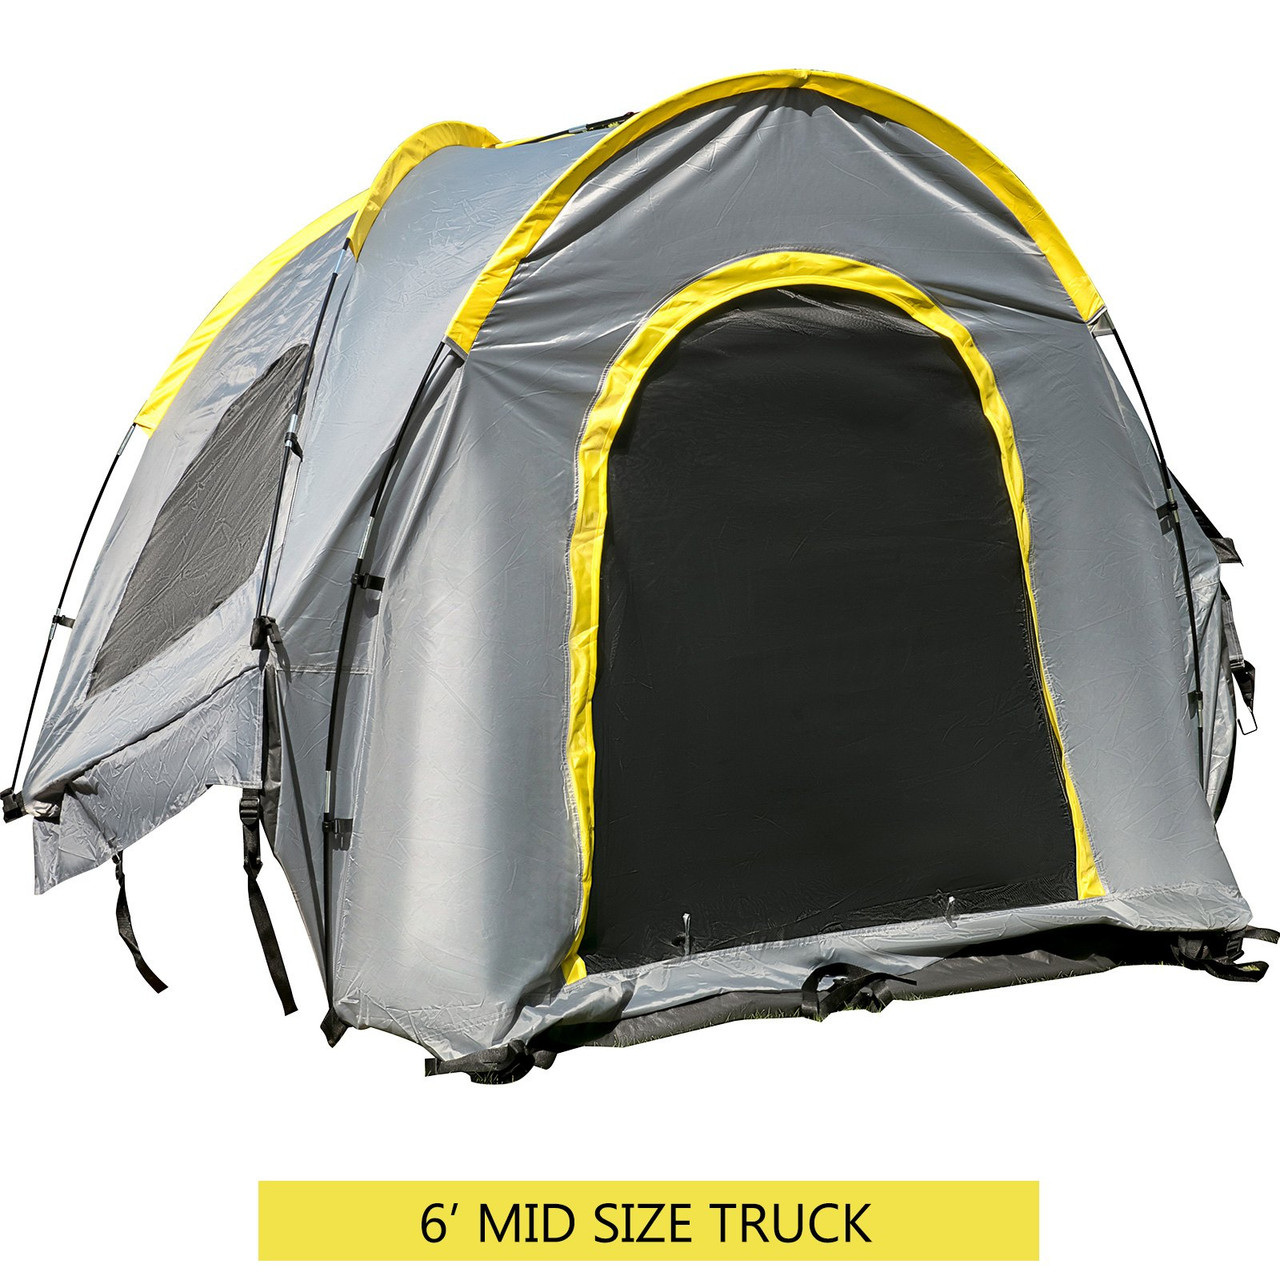 Truck Tent 6' Tall Bed Truck Bed Tent, Pickup Tent for Mid Size Truck, Waterproof Truck Camper, 2-Person Sleeping Capacity, 2 Mesh Windows, Easy to Setup Truck Tents for Camping, Hiking